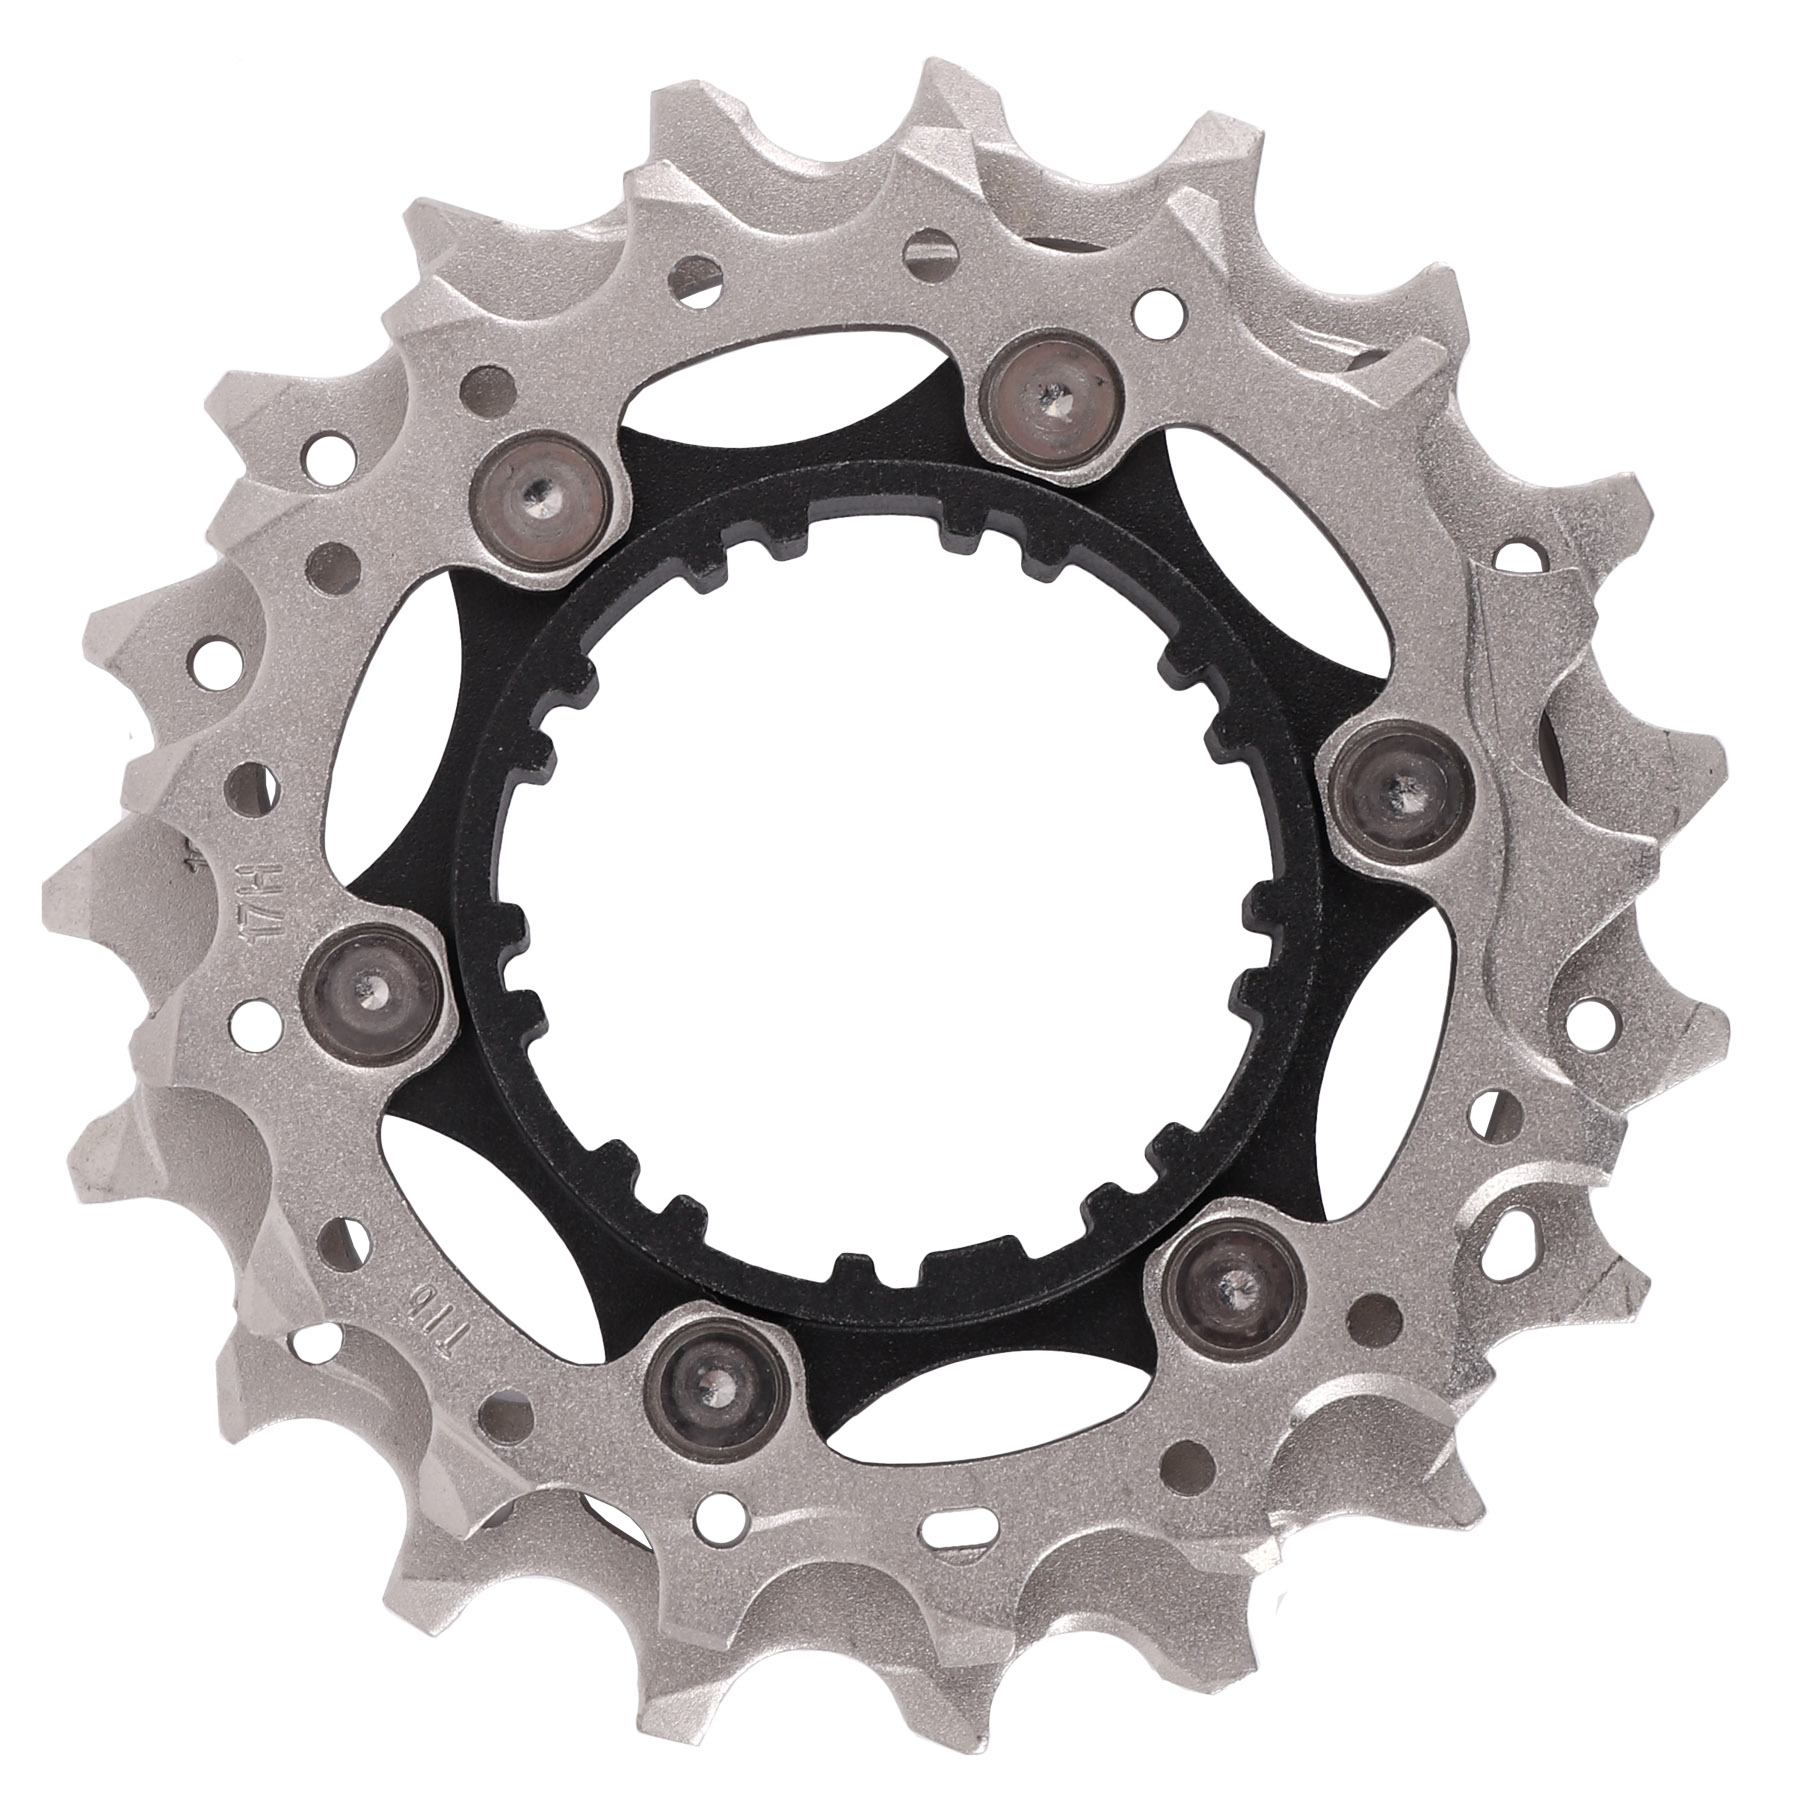 Picture of Shimano Sprocket Unit for Ultegra CS-R8100 Cassette - 17-19 Teeth | Y0NR98040